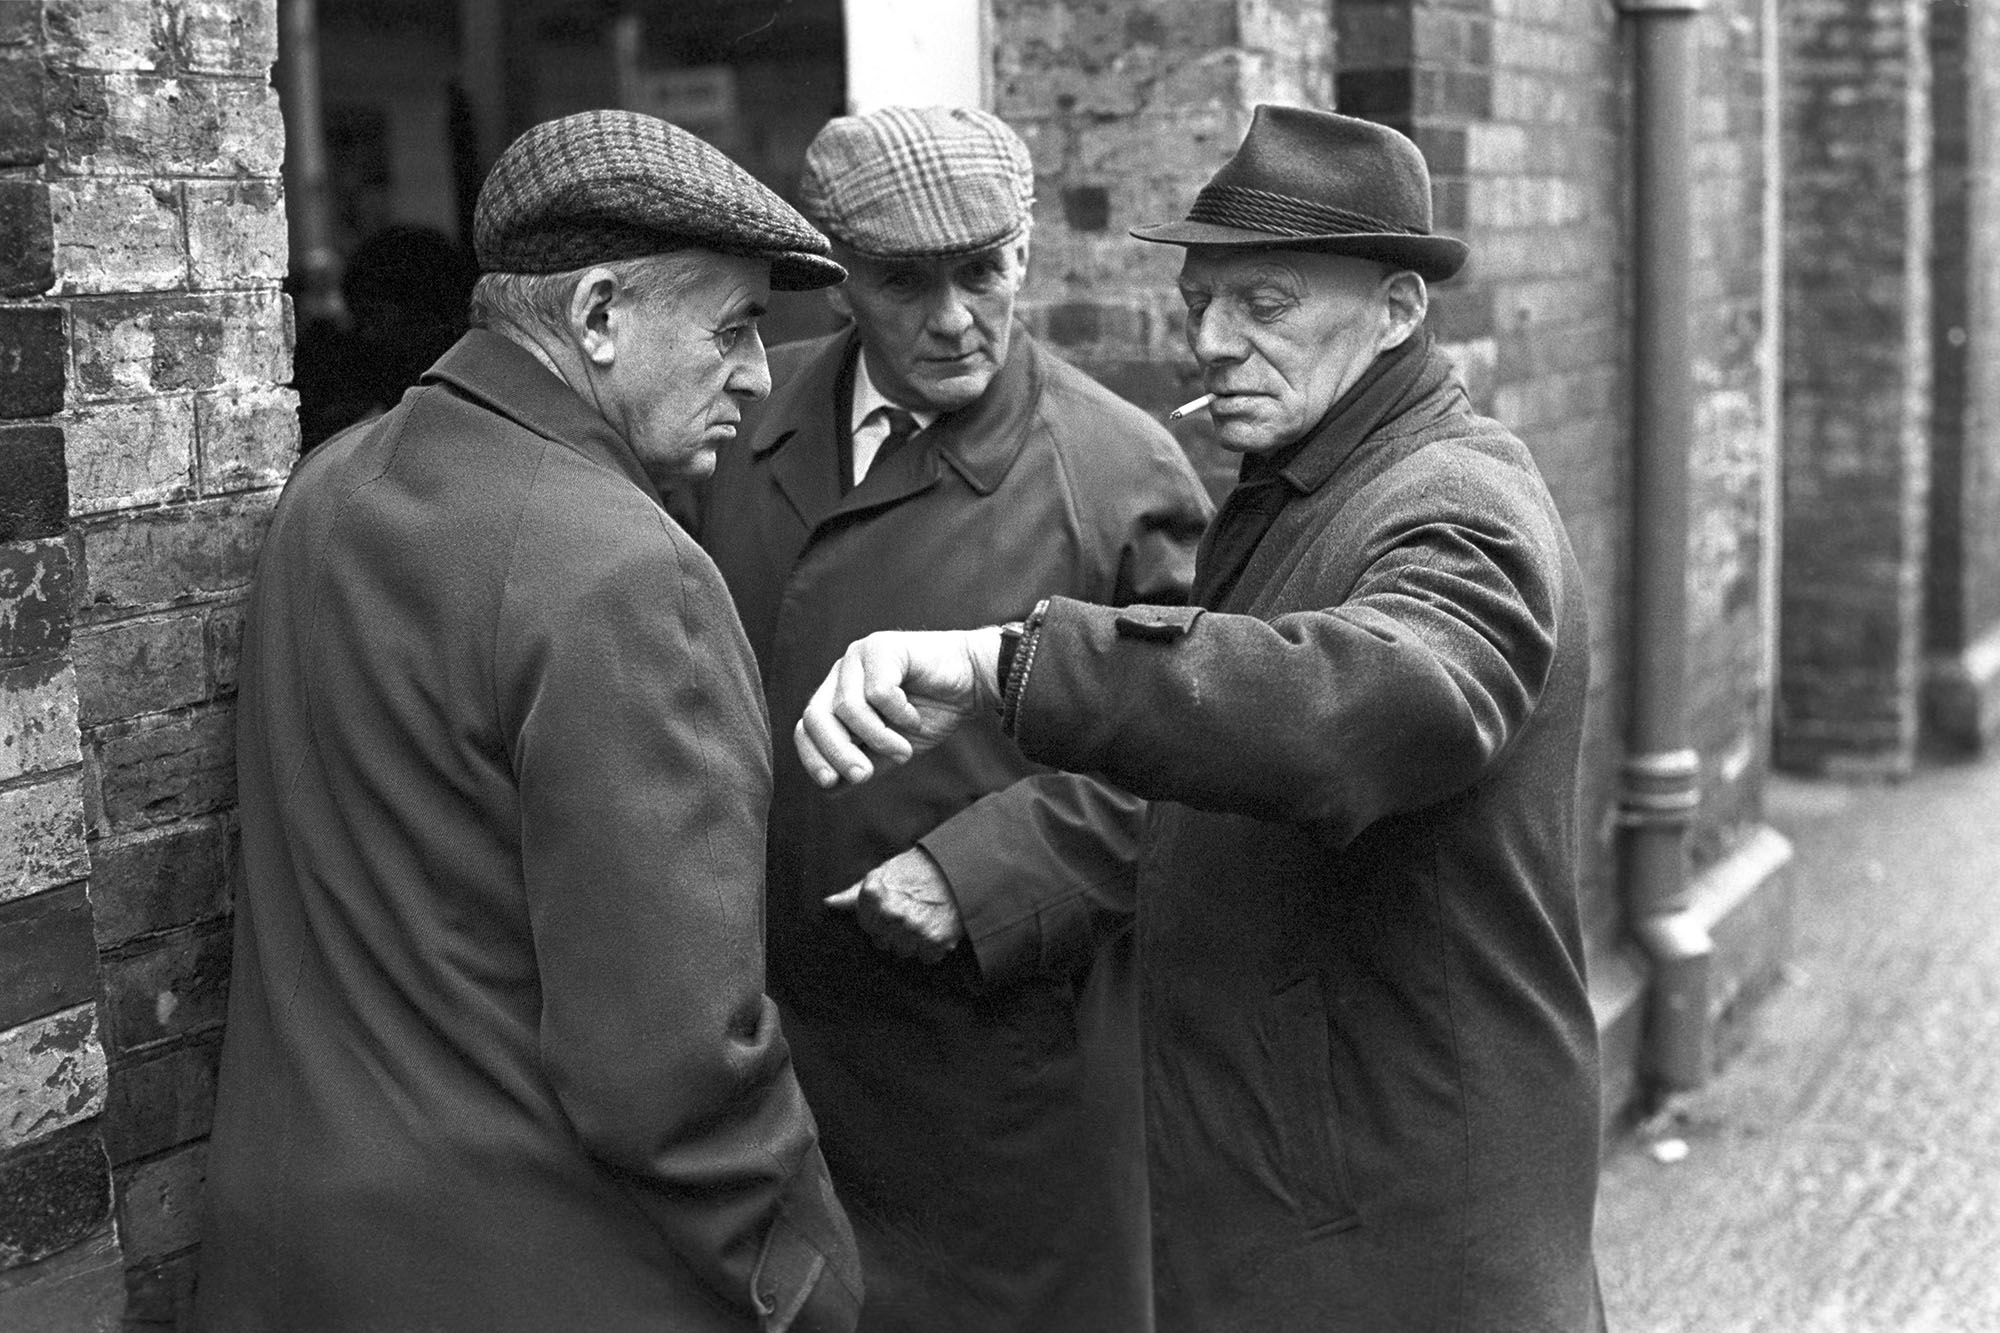 Men chatting outside the Pannier Market by James Ravilious